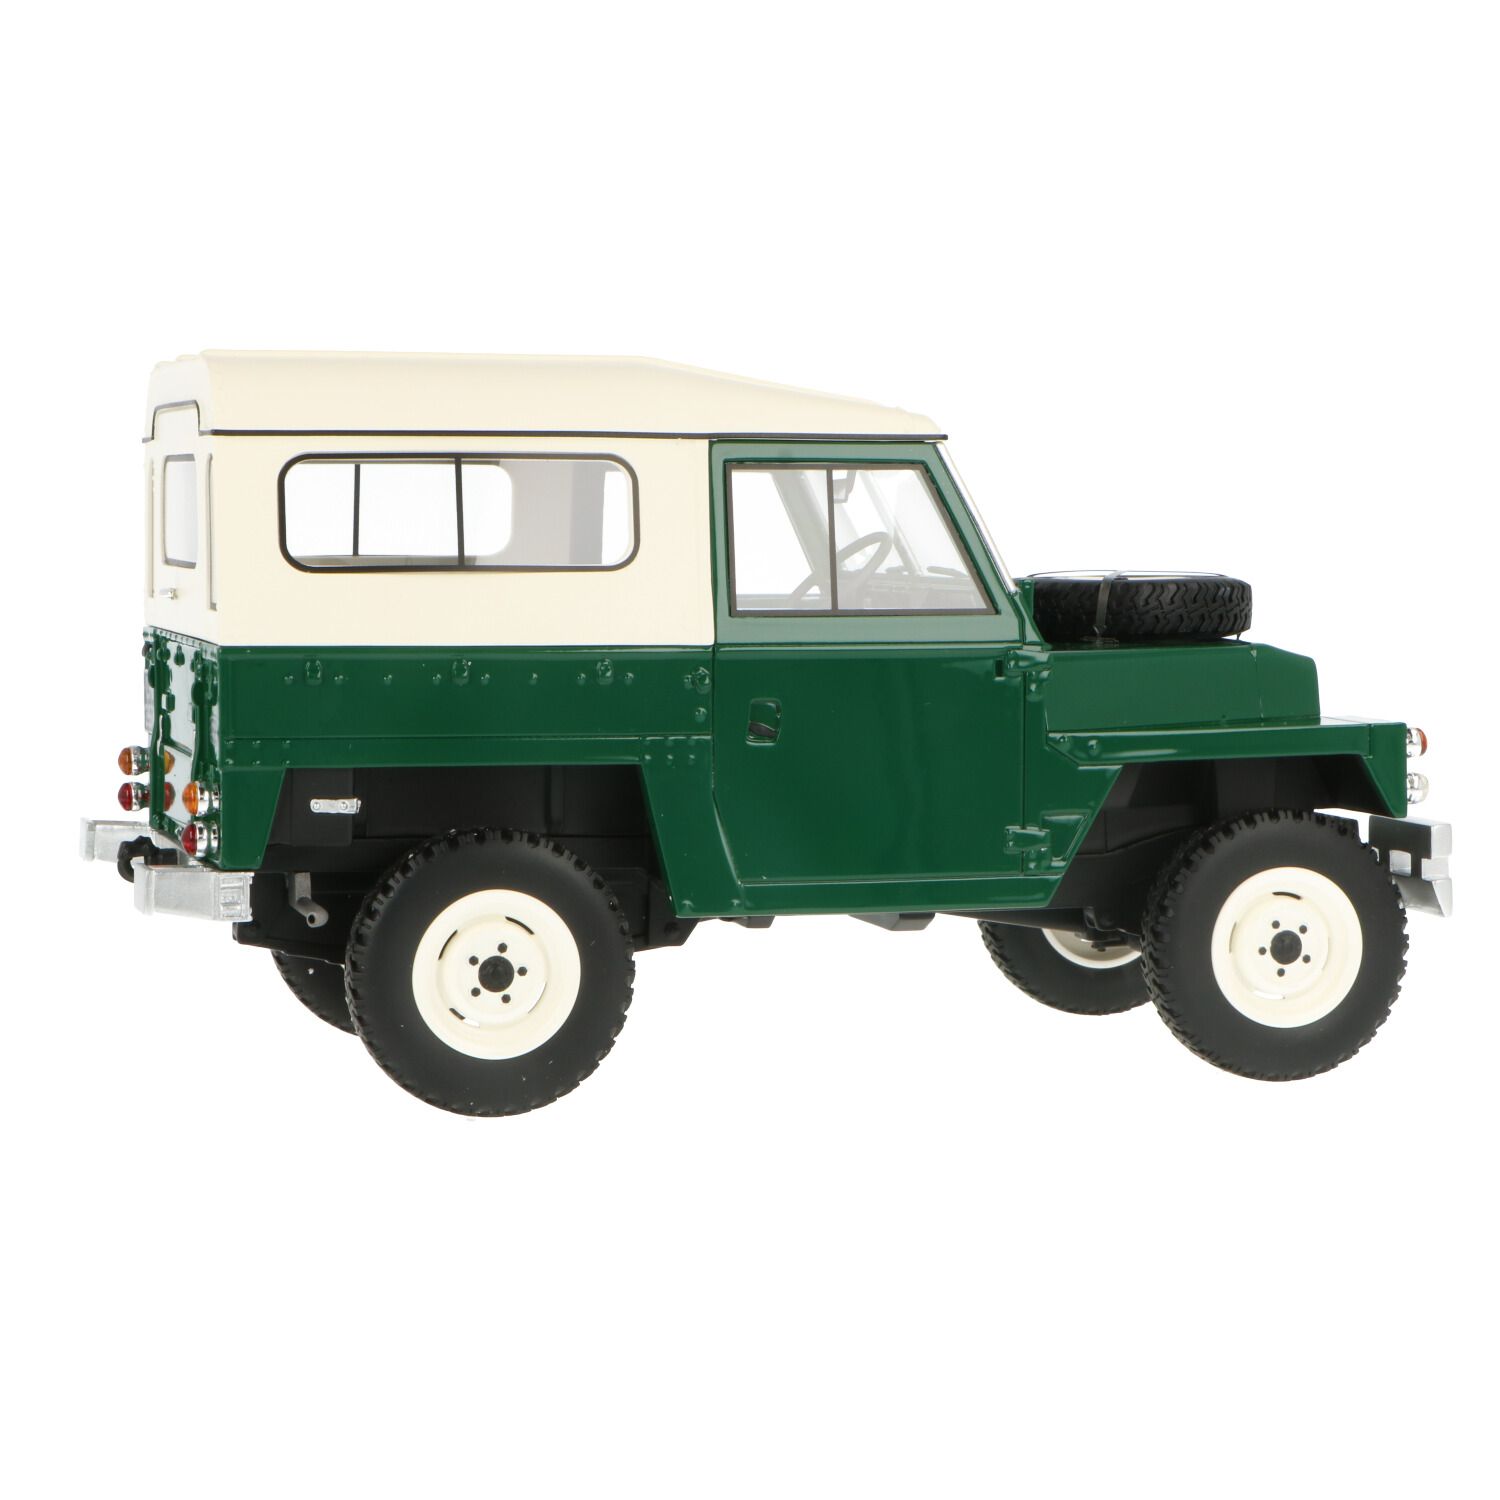 Bos Models Land Rover Series 3 Lightweight 1939 BOS43670 1:43 